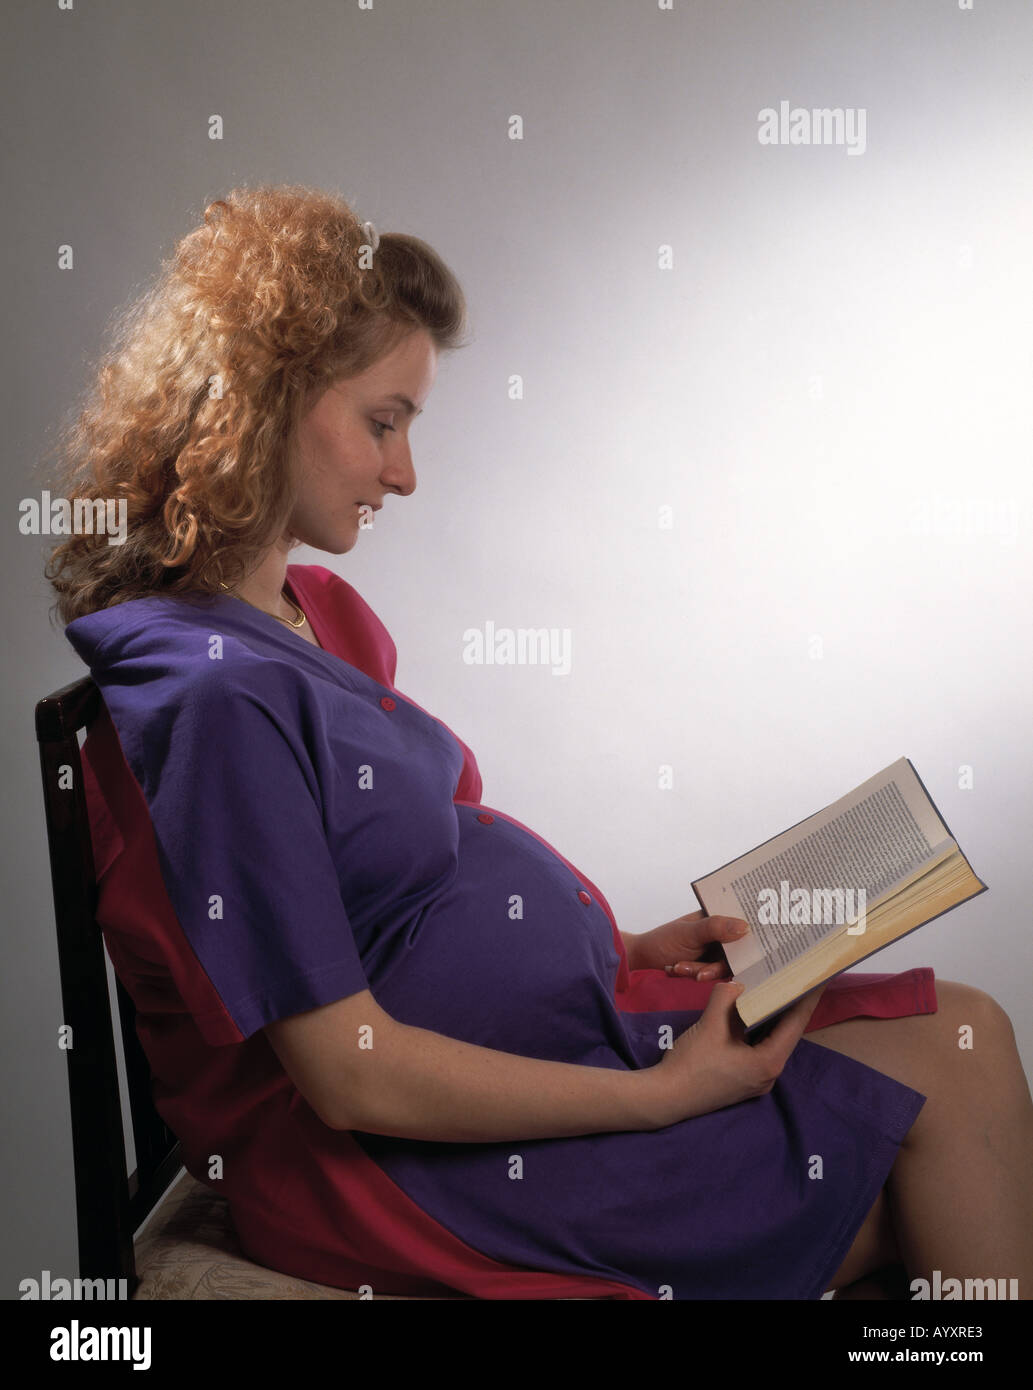 young girl, young woman, 20 to 25 years, portrait, brown, brunette, long hair, sitting on a chair, reading a book, read, reader, pregnant, expectant, far advanced in pregnancy, pregnancy, pensive, pensiveness, thoughtful, lost in thought, think, thinking Stock Photo